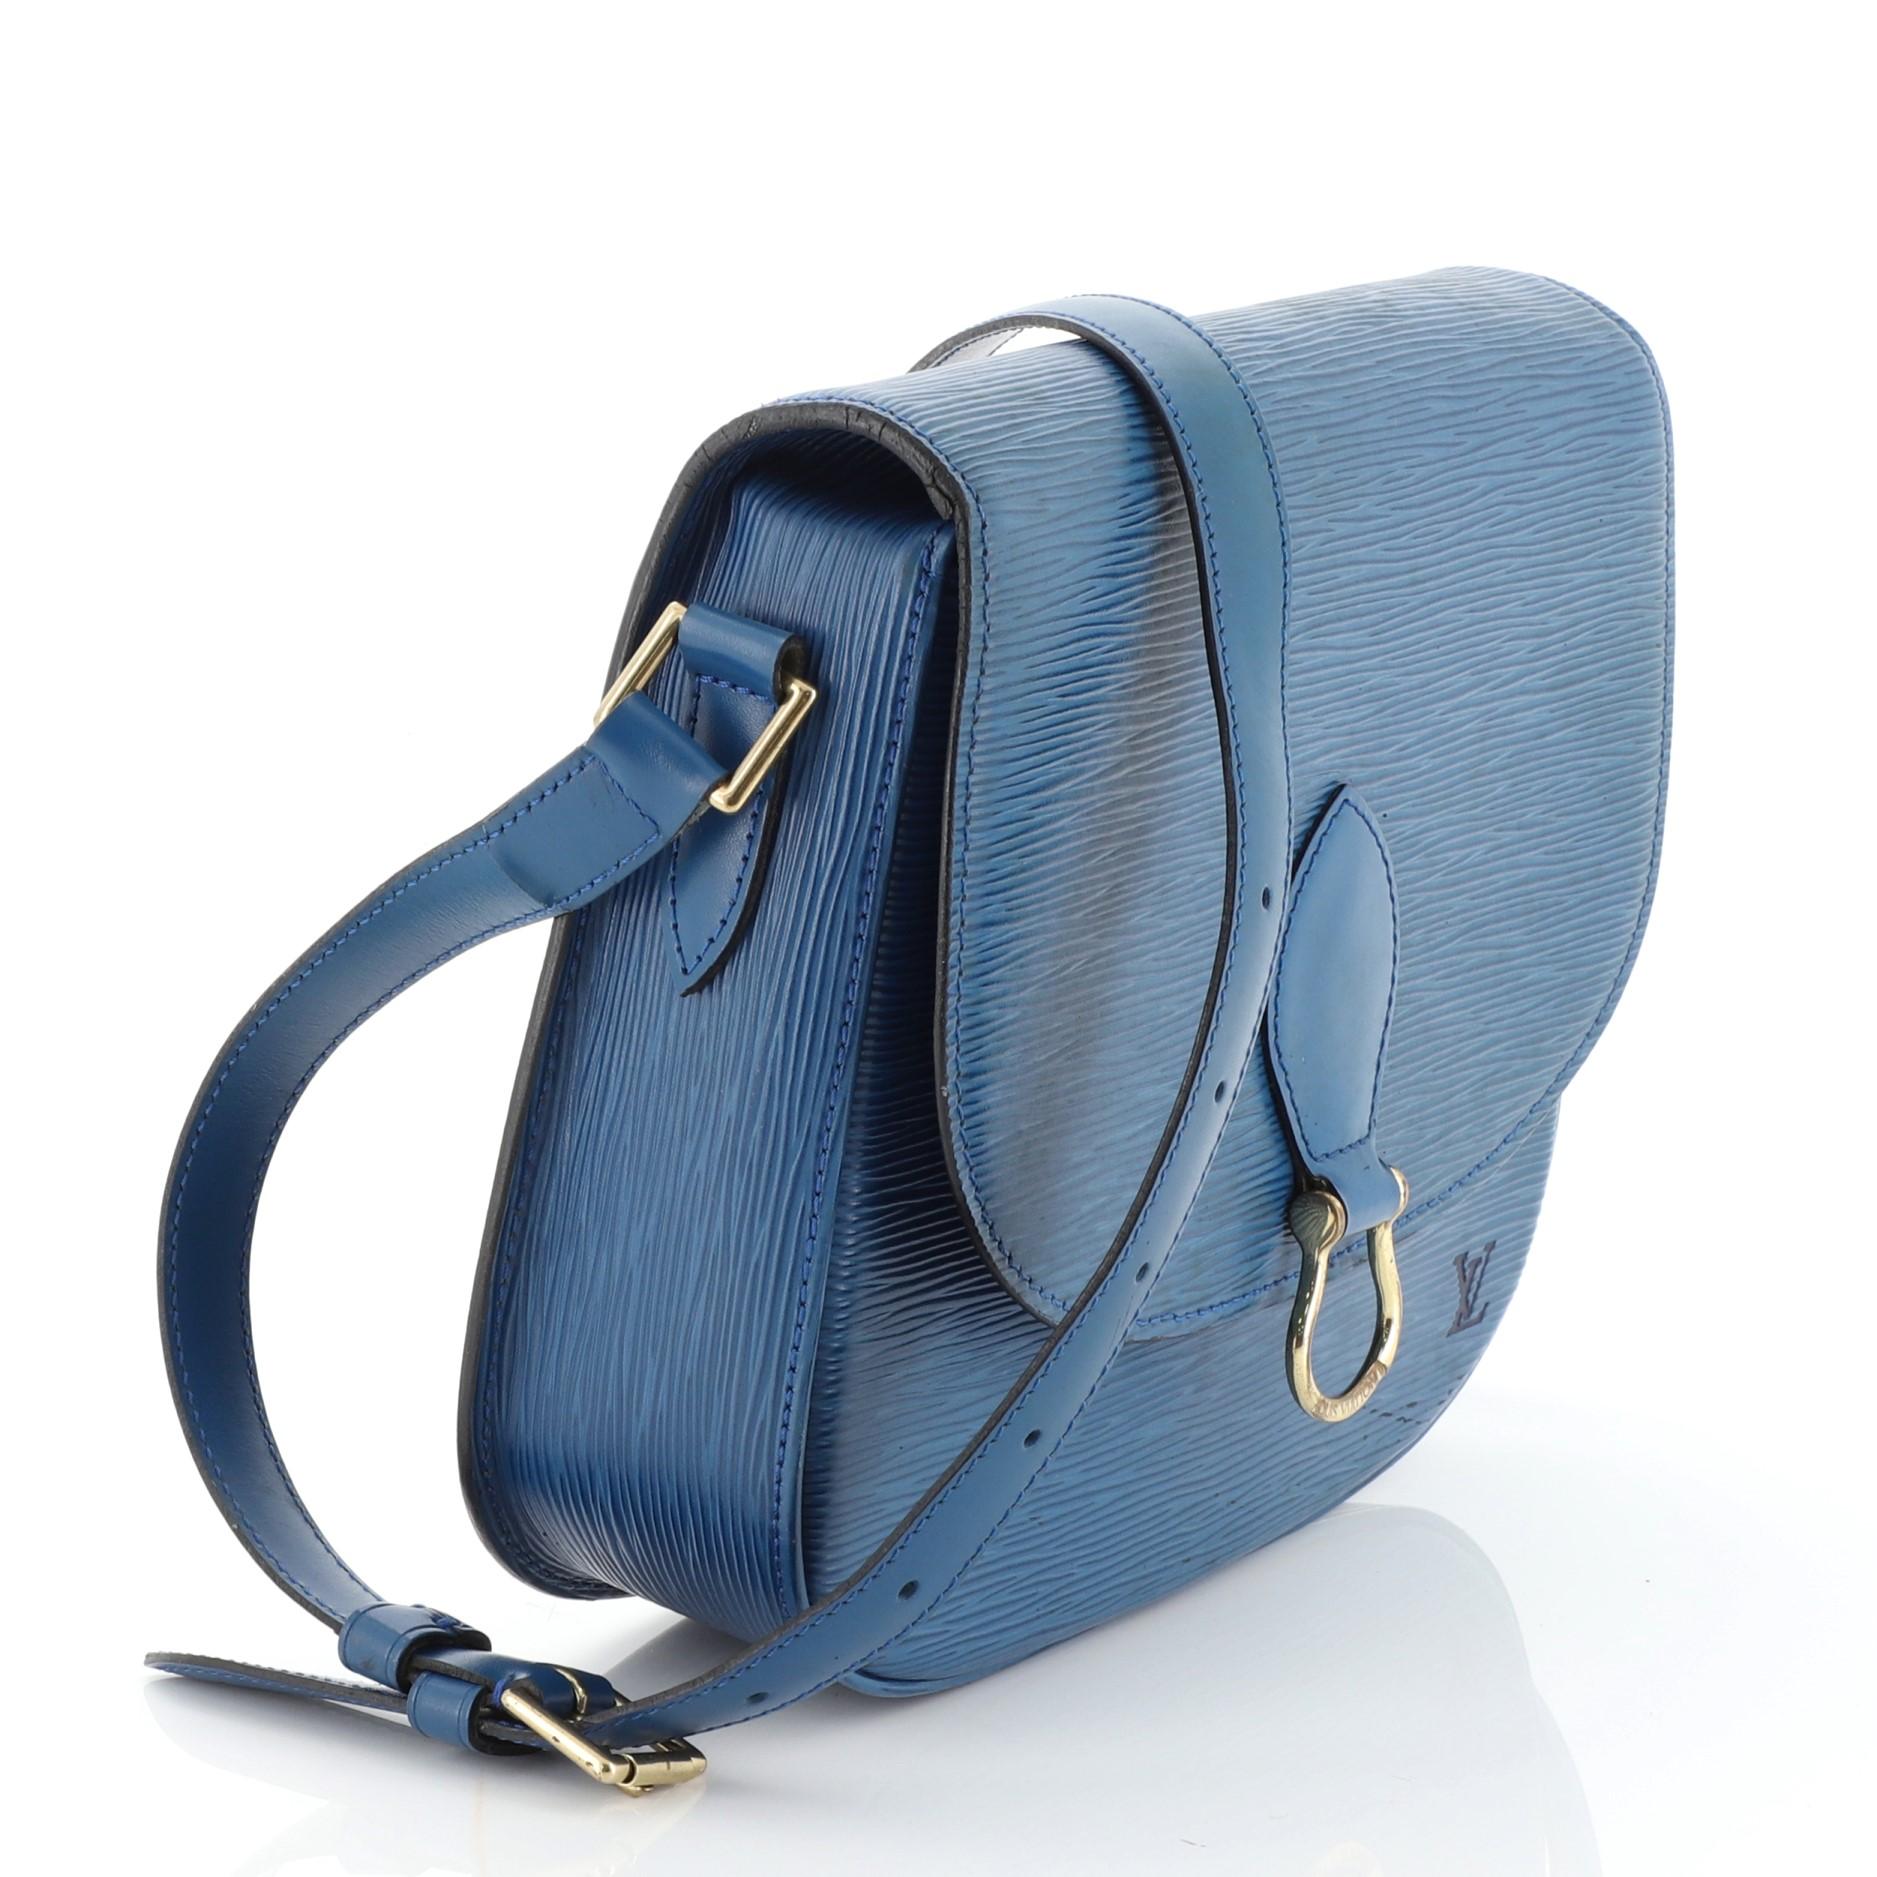 This Louis Vuitton Saint Cloud Handbag Epi Leather GM, crafted in blue leather, features exterior back pocket, an adjustable crossbody straps and gold-tone hardware. Its push-lock closure opens to a black leather interior with zipped pocket.